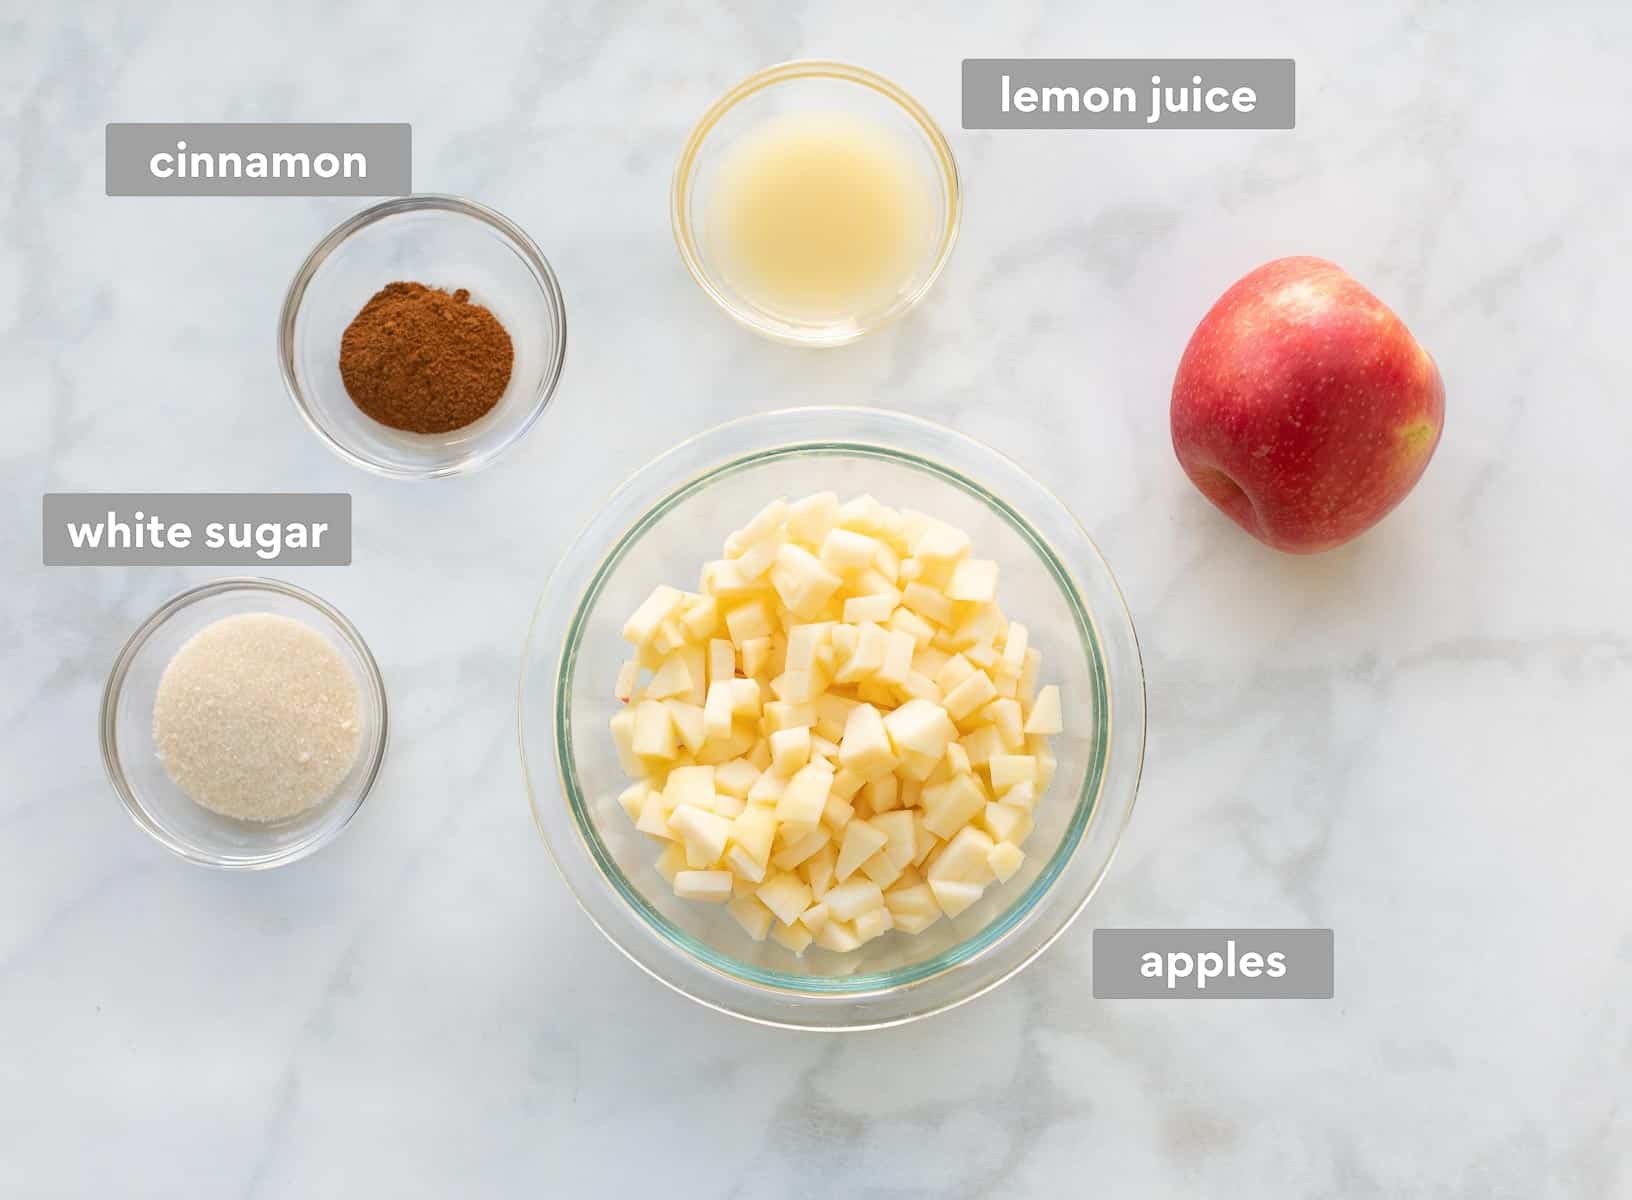 Apple muffin mixture ingredients on the counter